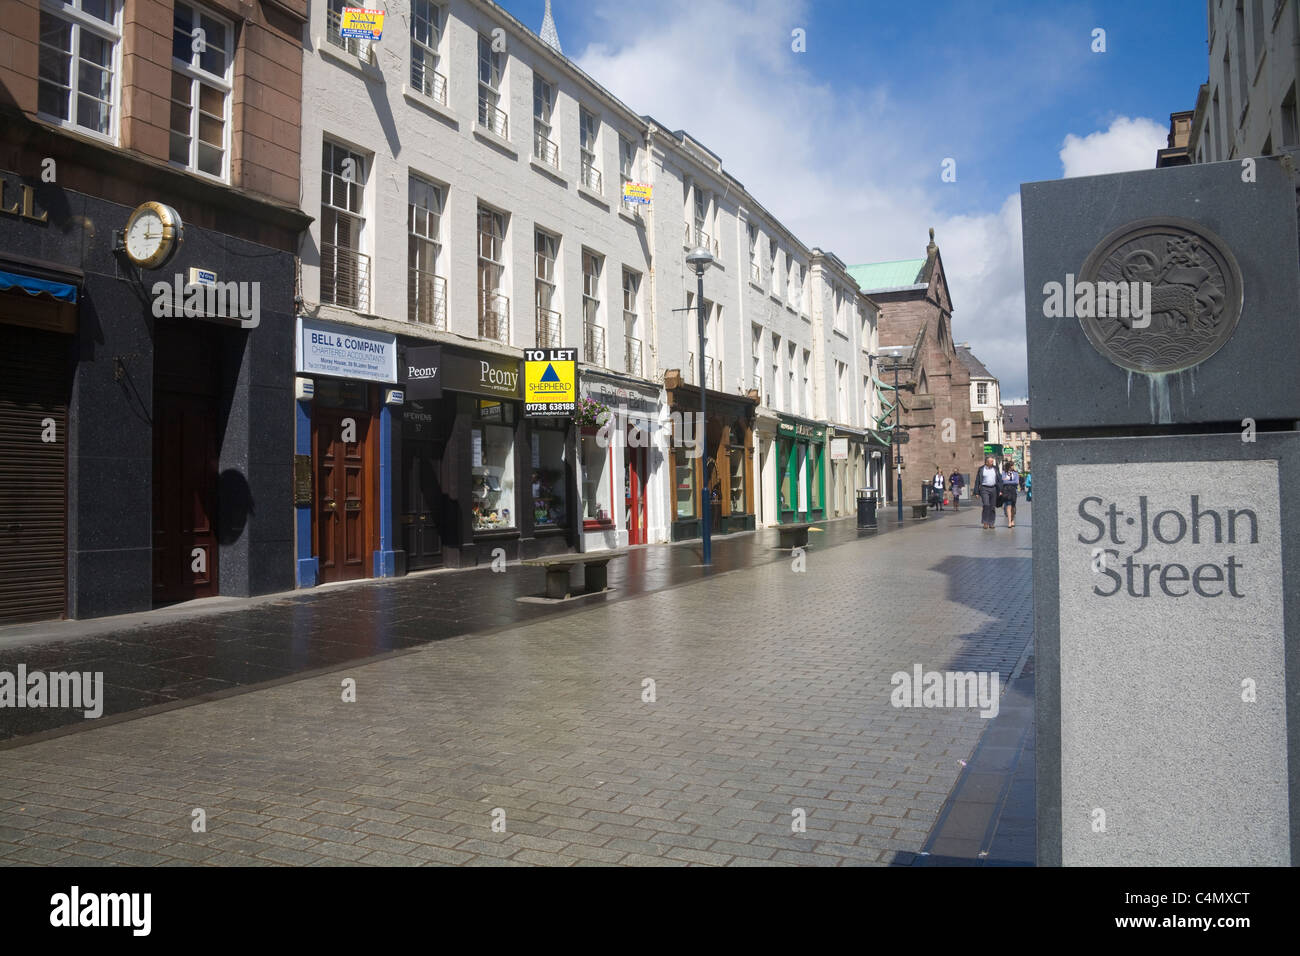 Perth Scotland UK Pedestrianised St John's Street in the town centre Stock Photo